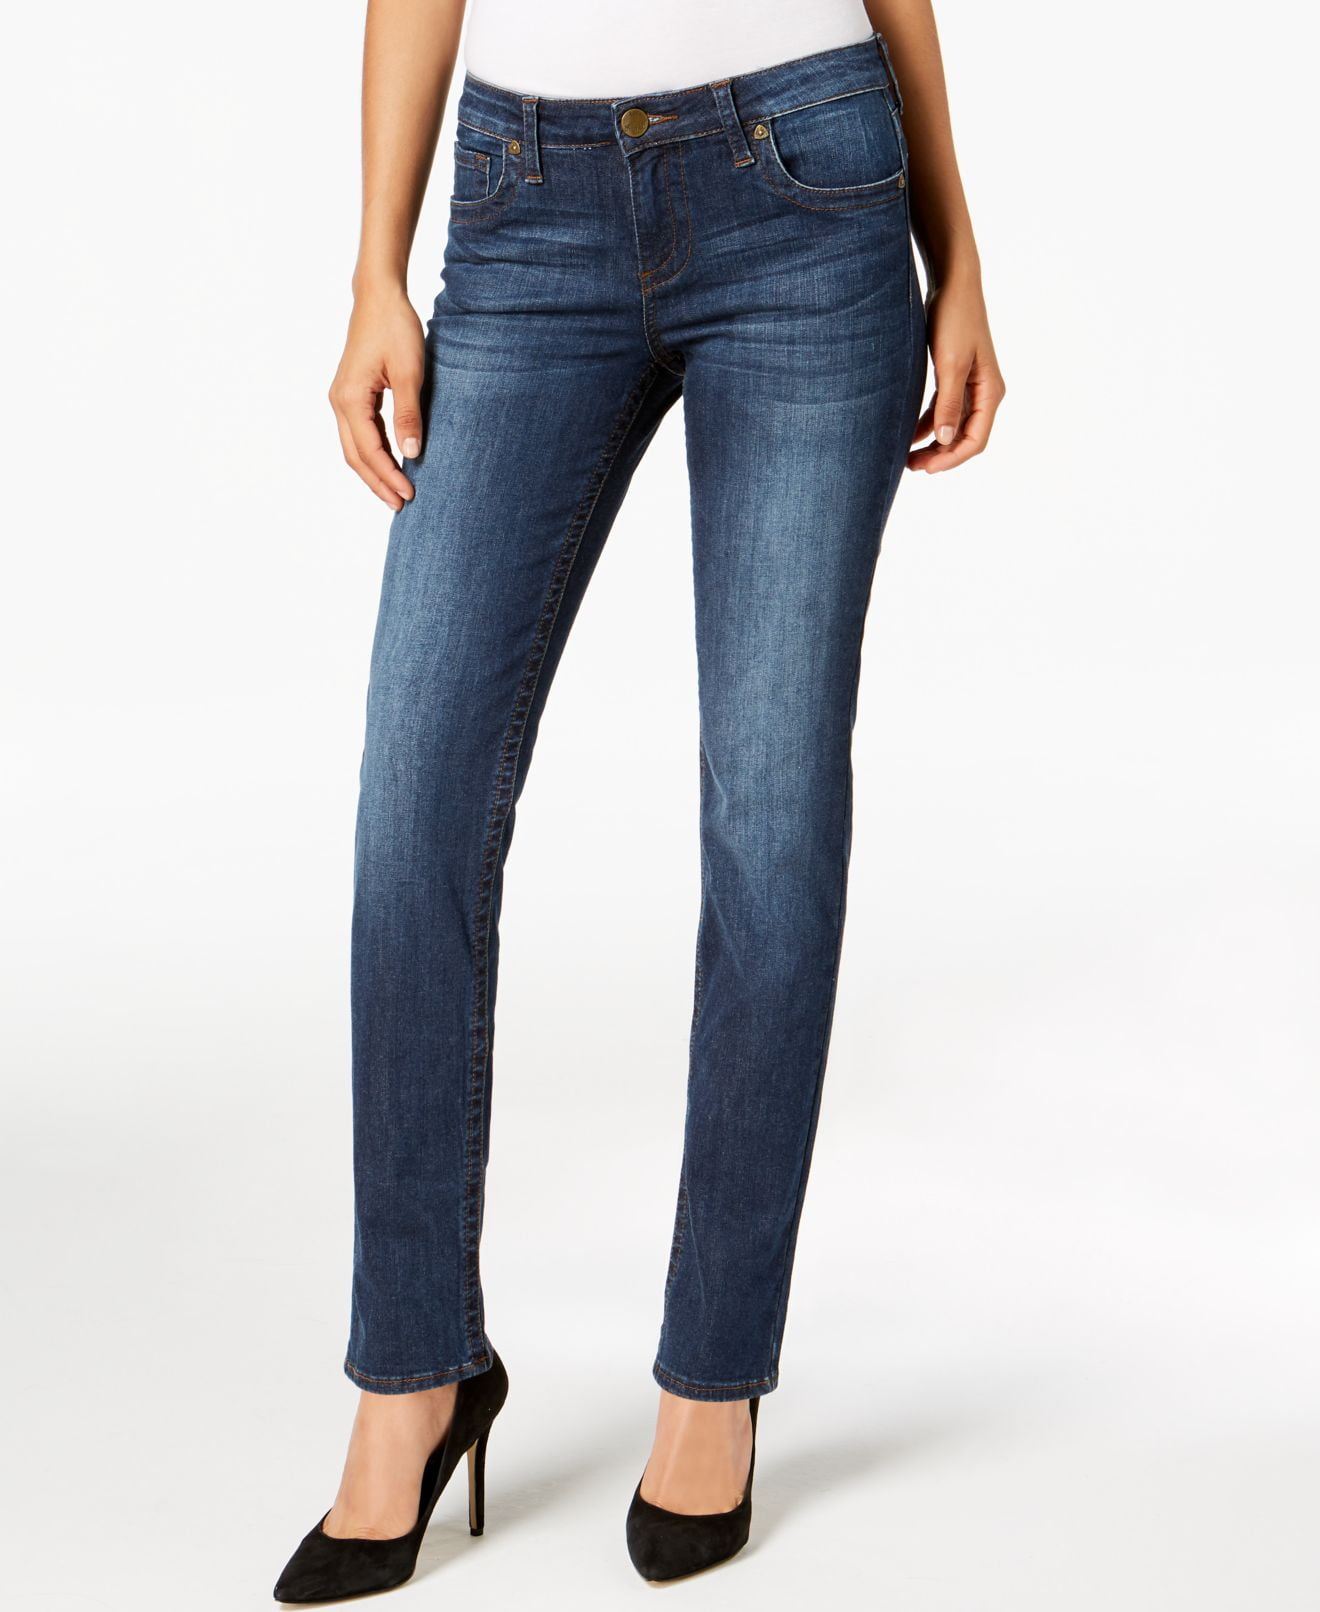 KUT from the Kloth - Womens Jeans Petite Straight Leg Stretch 4P ...